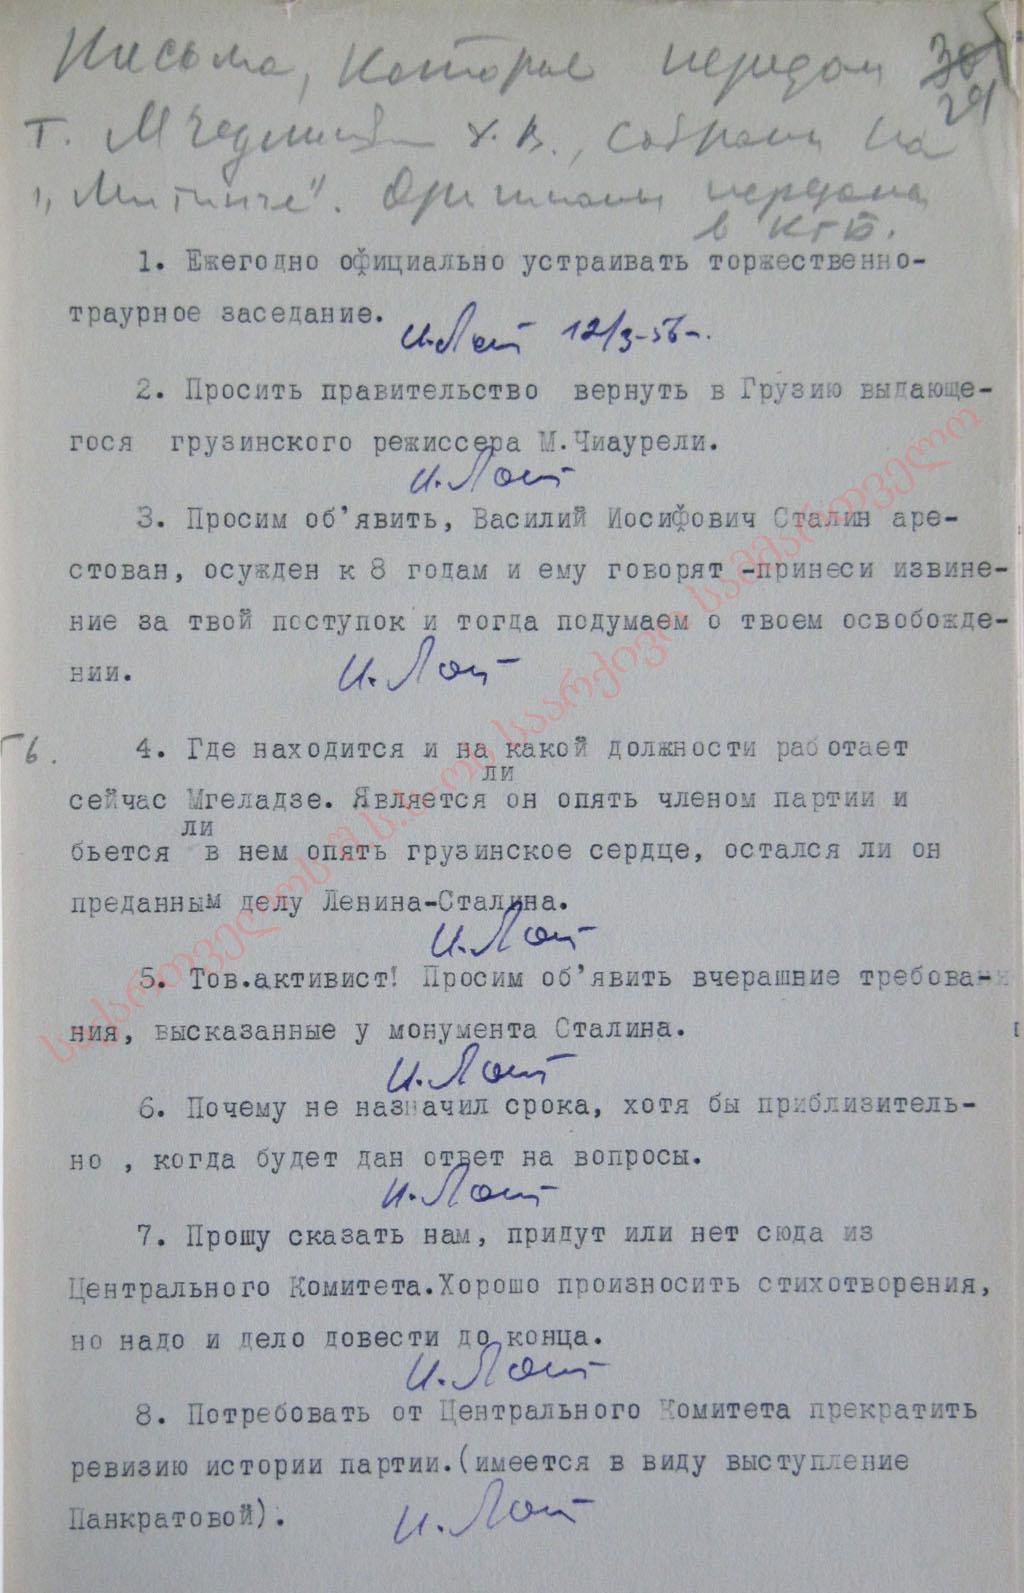 Notes and letters taken away from the activists that came to the Central Committee of Communist Party of Georgia. March 8-10, 1956 